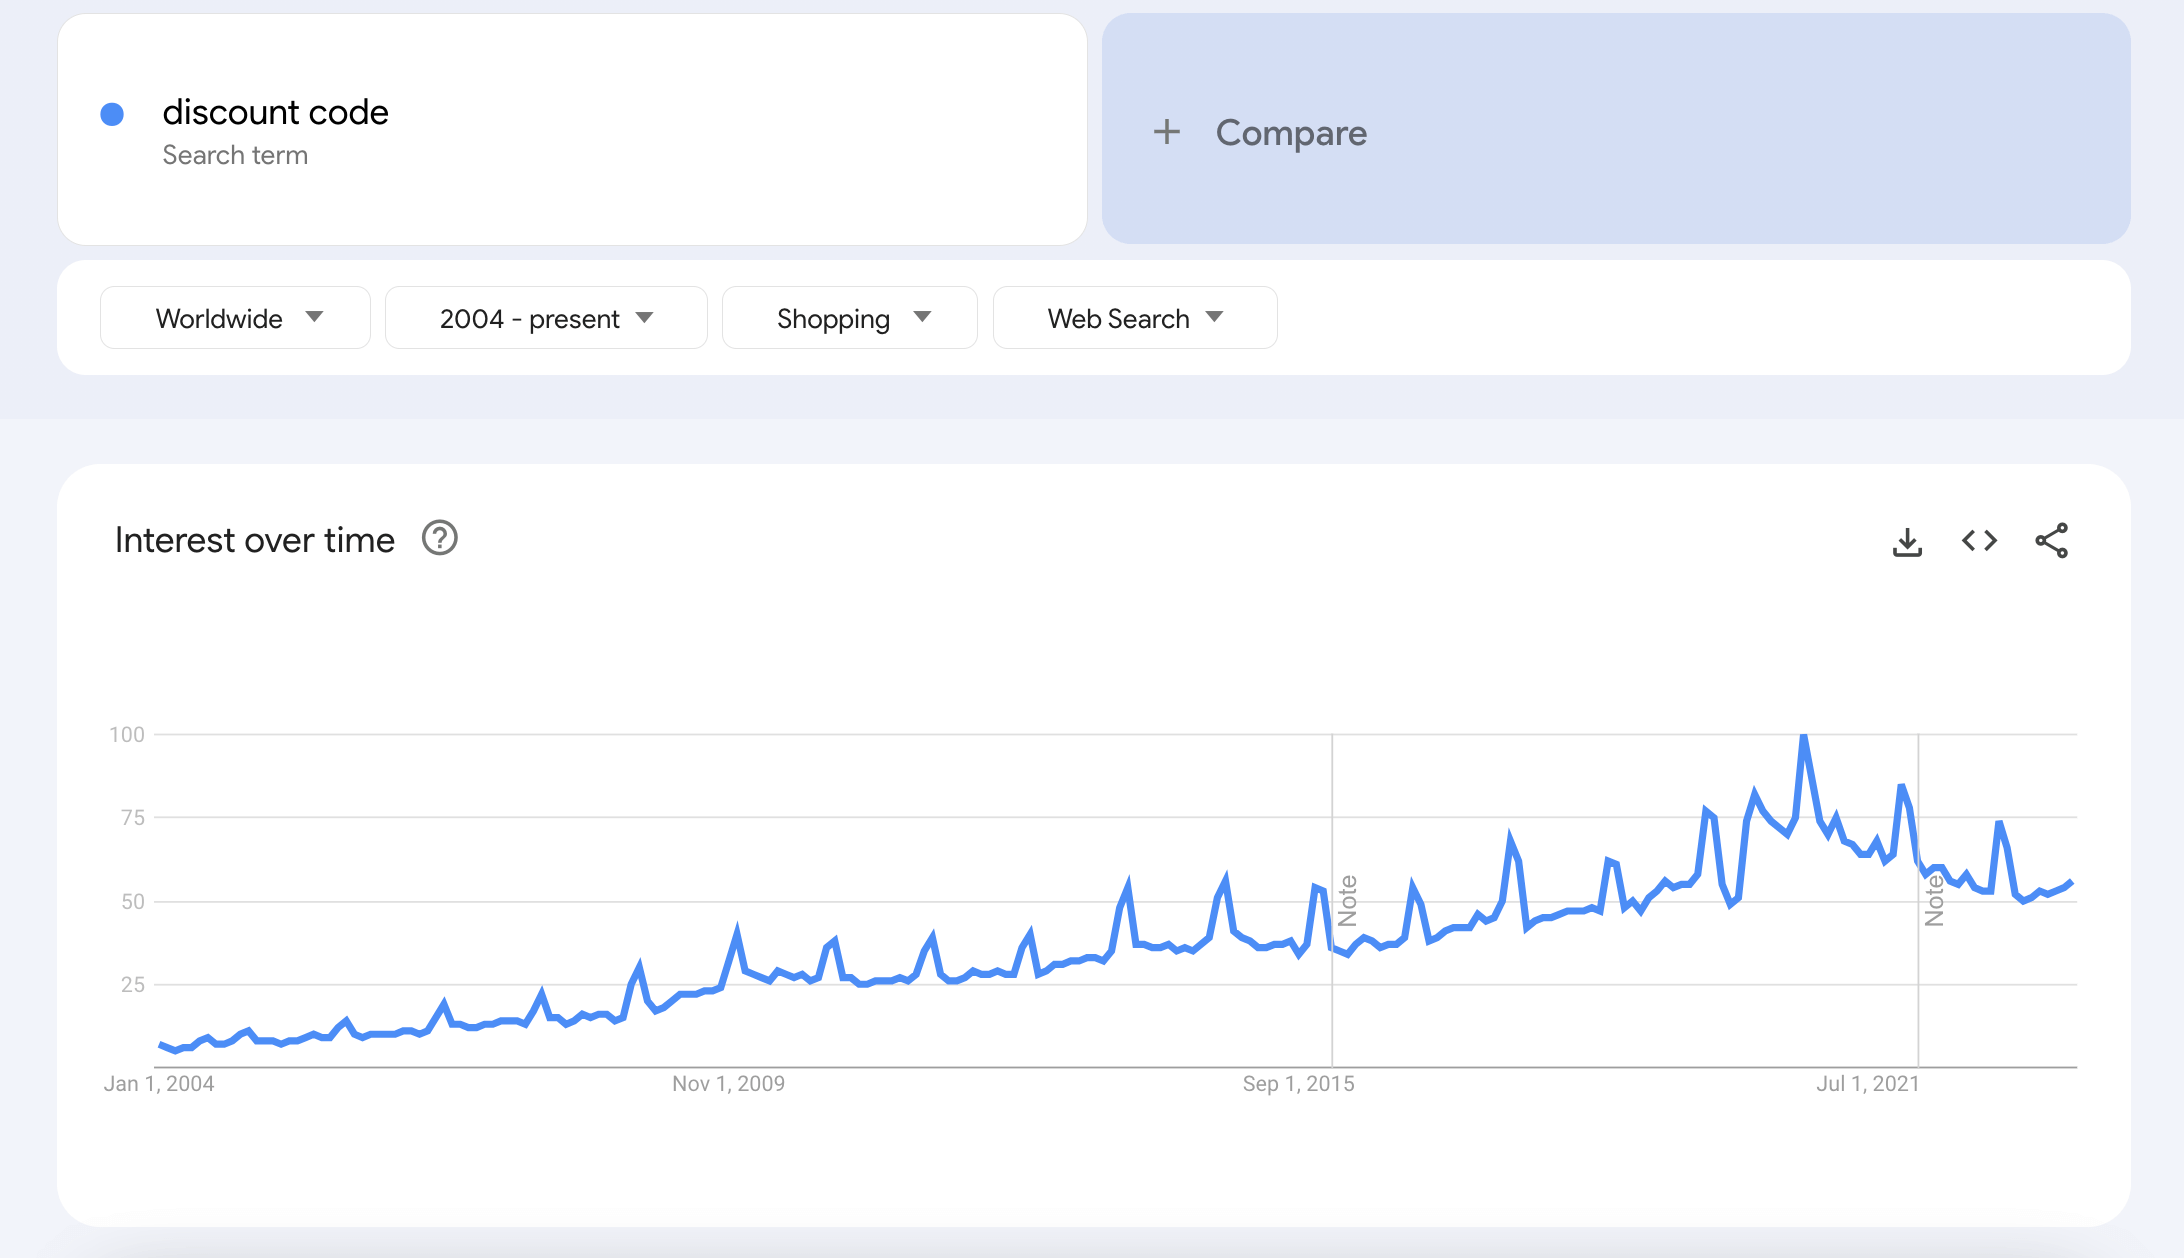 Google Trends with the search term "discount code" screenshot